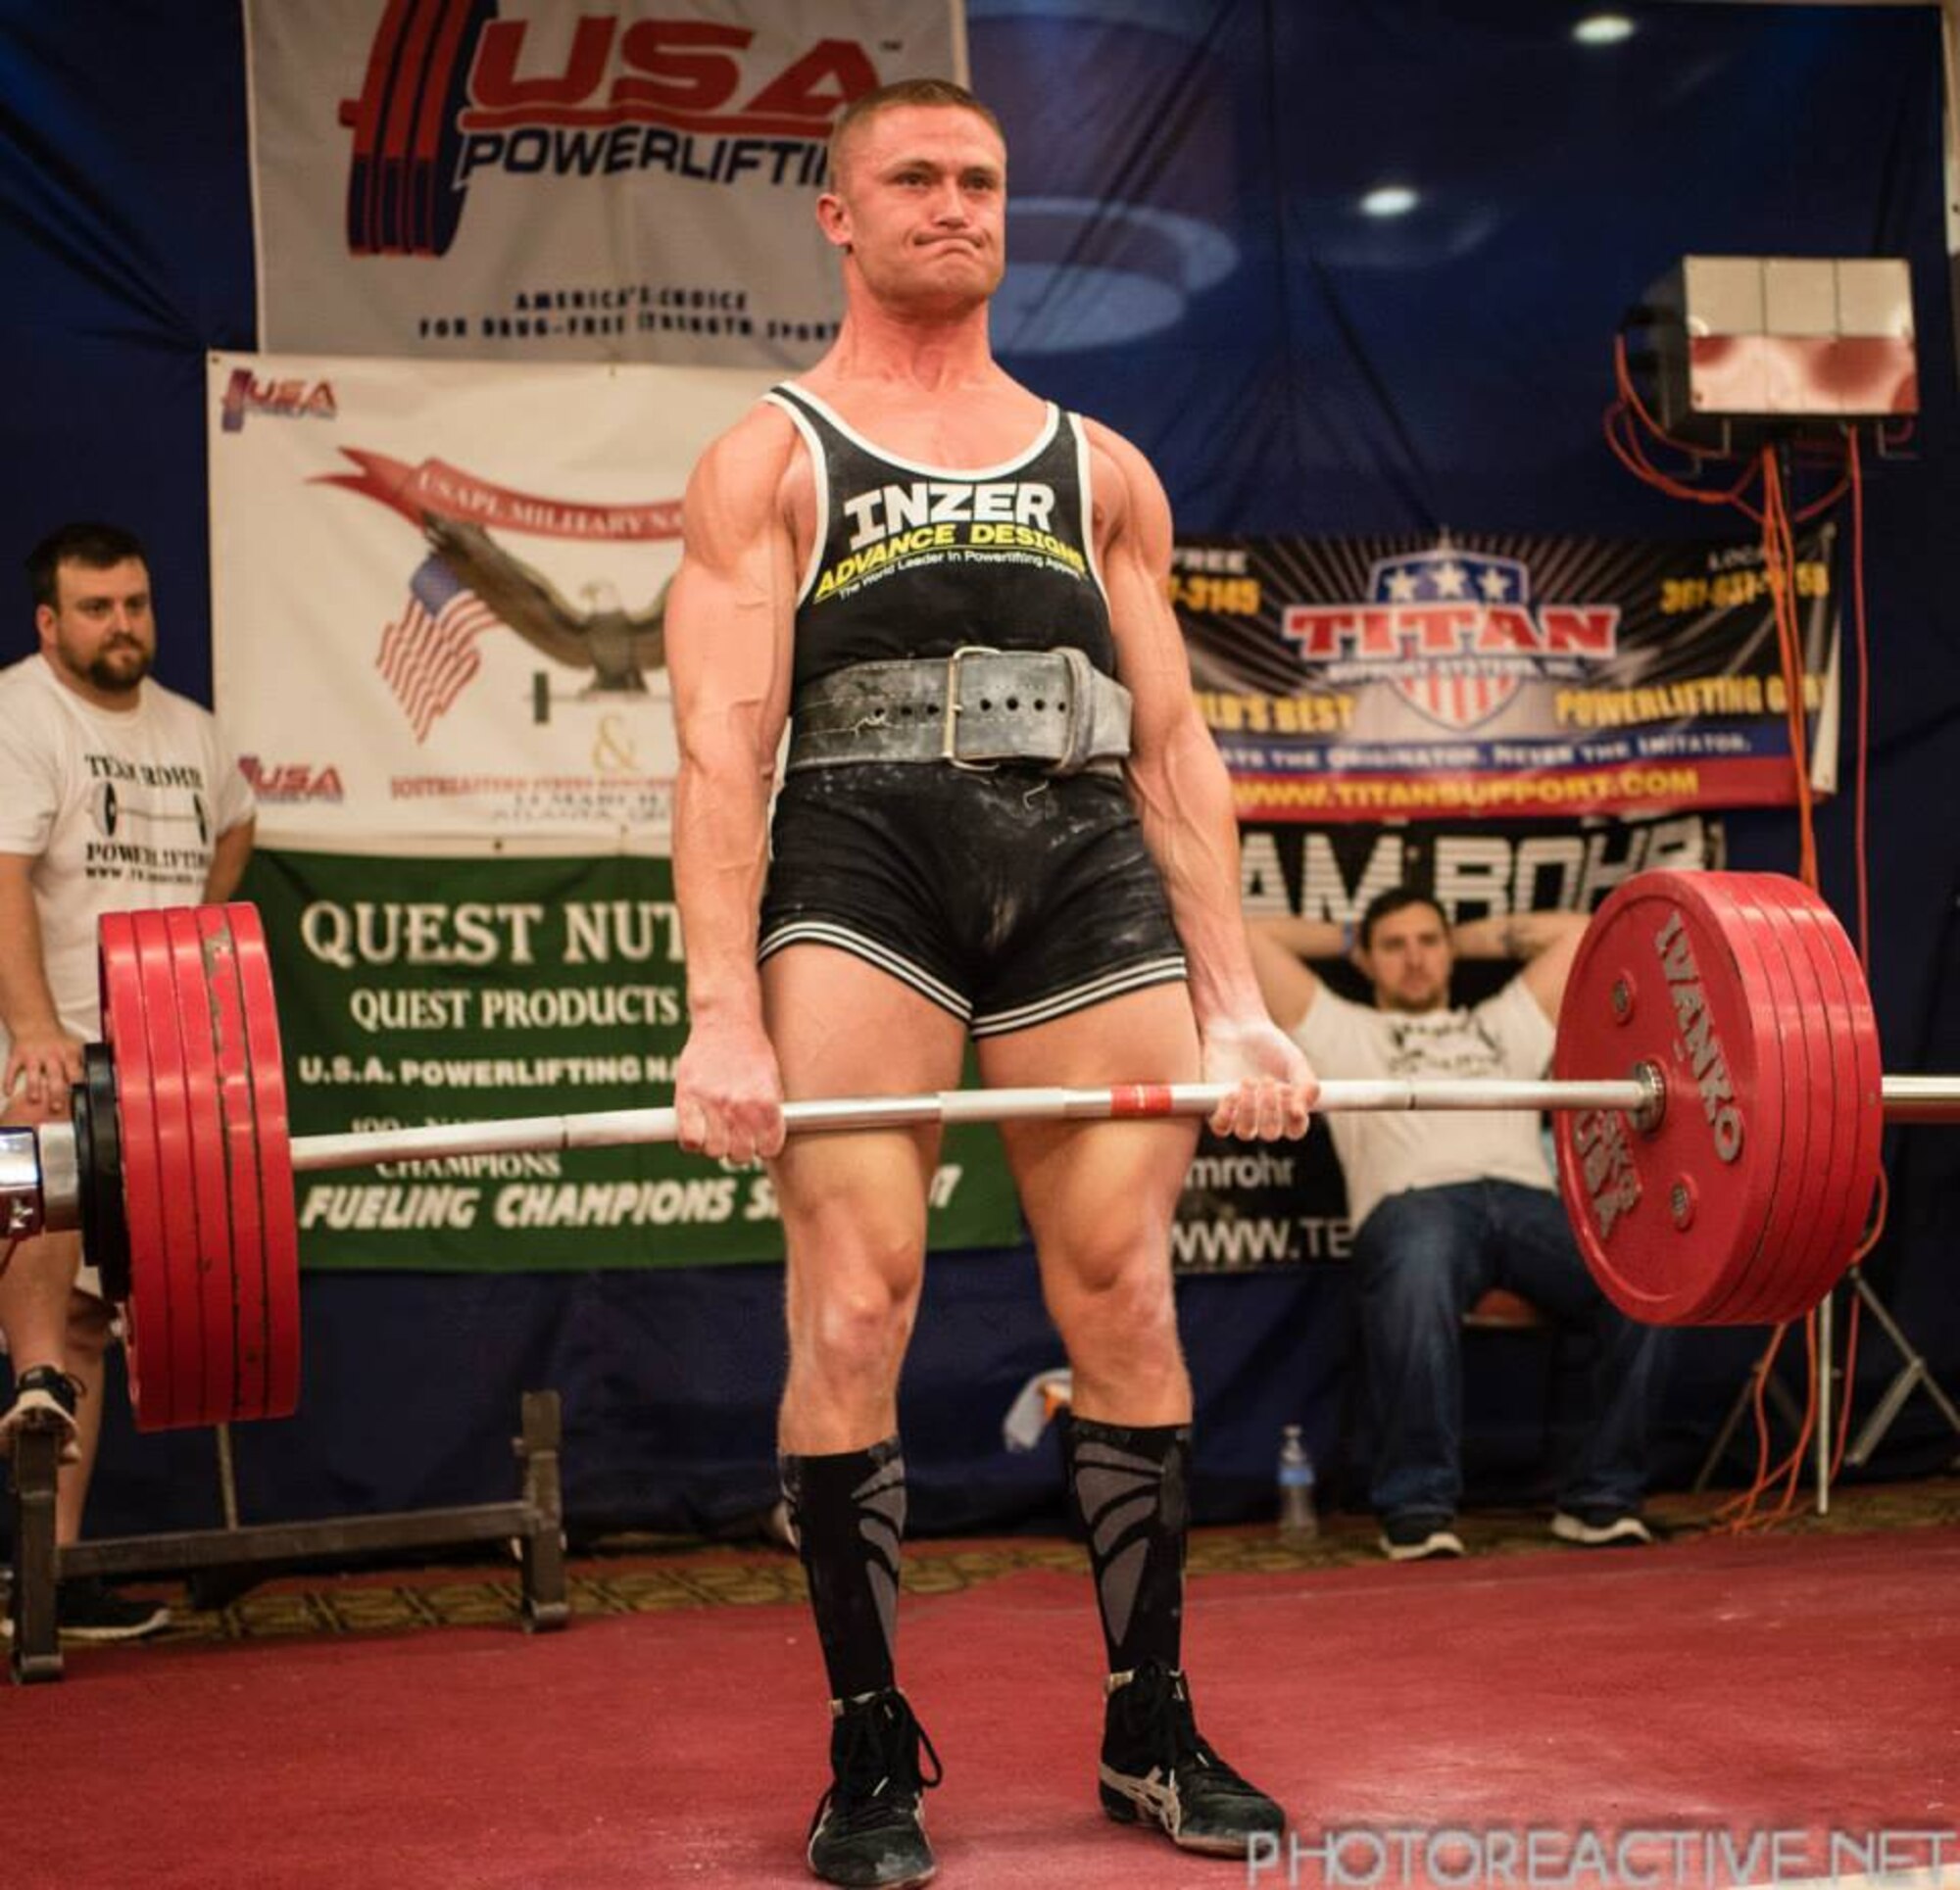 Master Sgt. Michael D. Lear, 347th Recruiting Squadron, was a member of the Air Force Powerlifting Team that won the silver at the 2015 USAPL Military Nationals and Southeastern State Bench Competition in Atlanta March 14, 2015. (Courtesy photo)